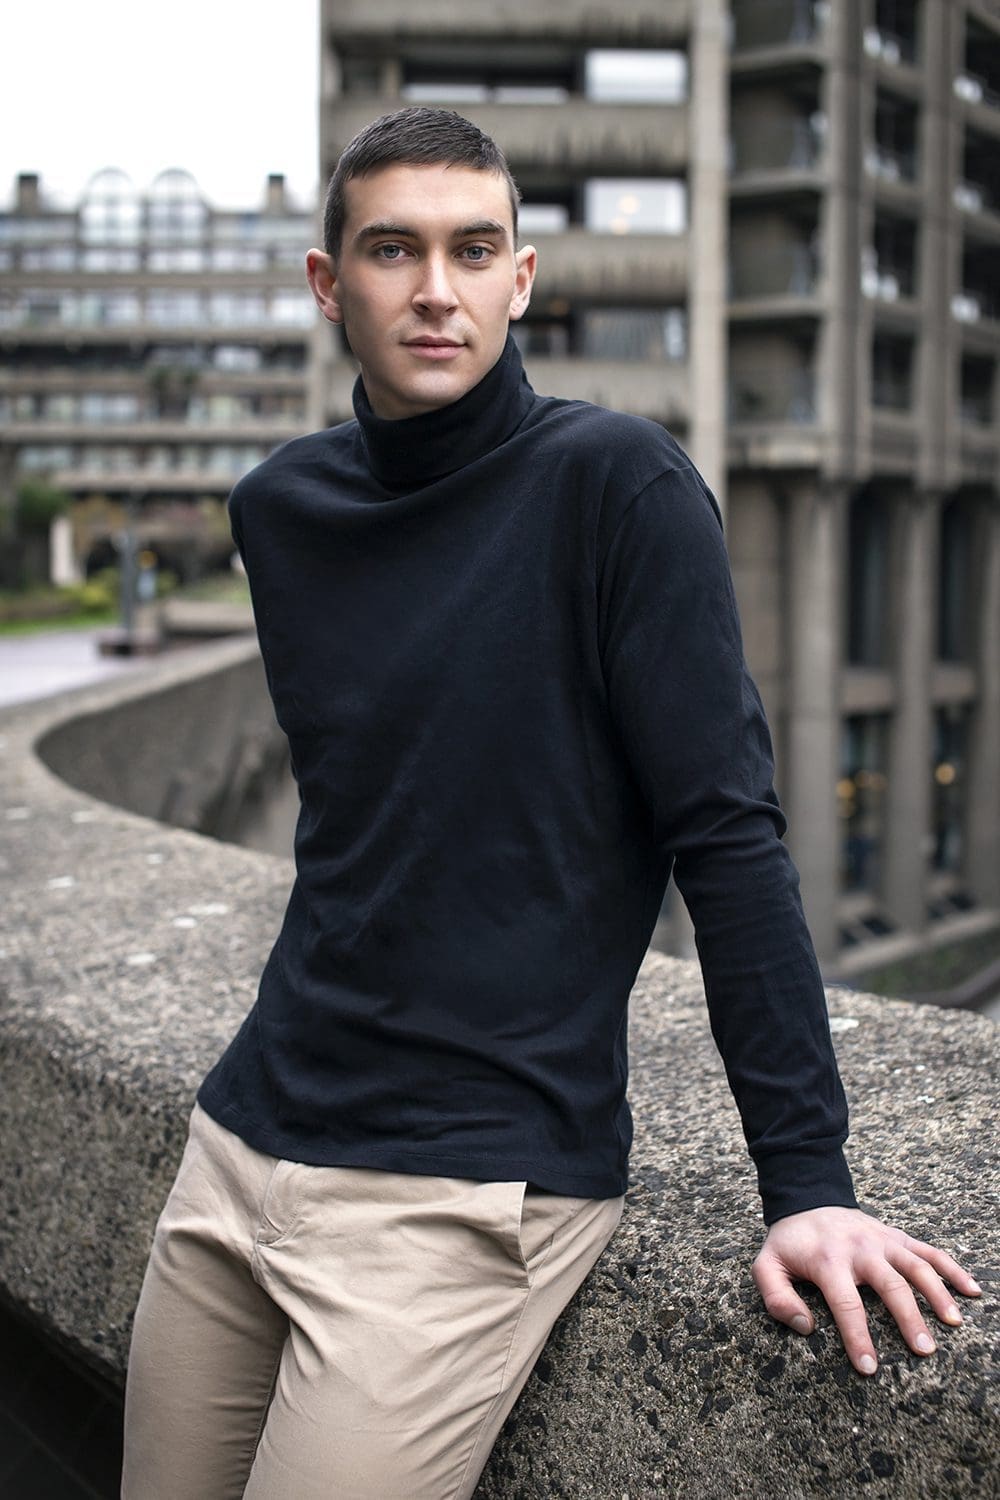 mid-shot of a man leaning on a stone wall outdoors in a navy turtleneck